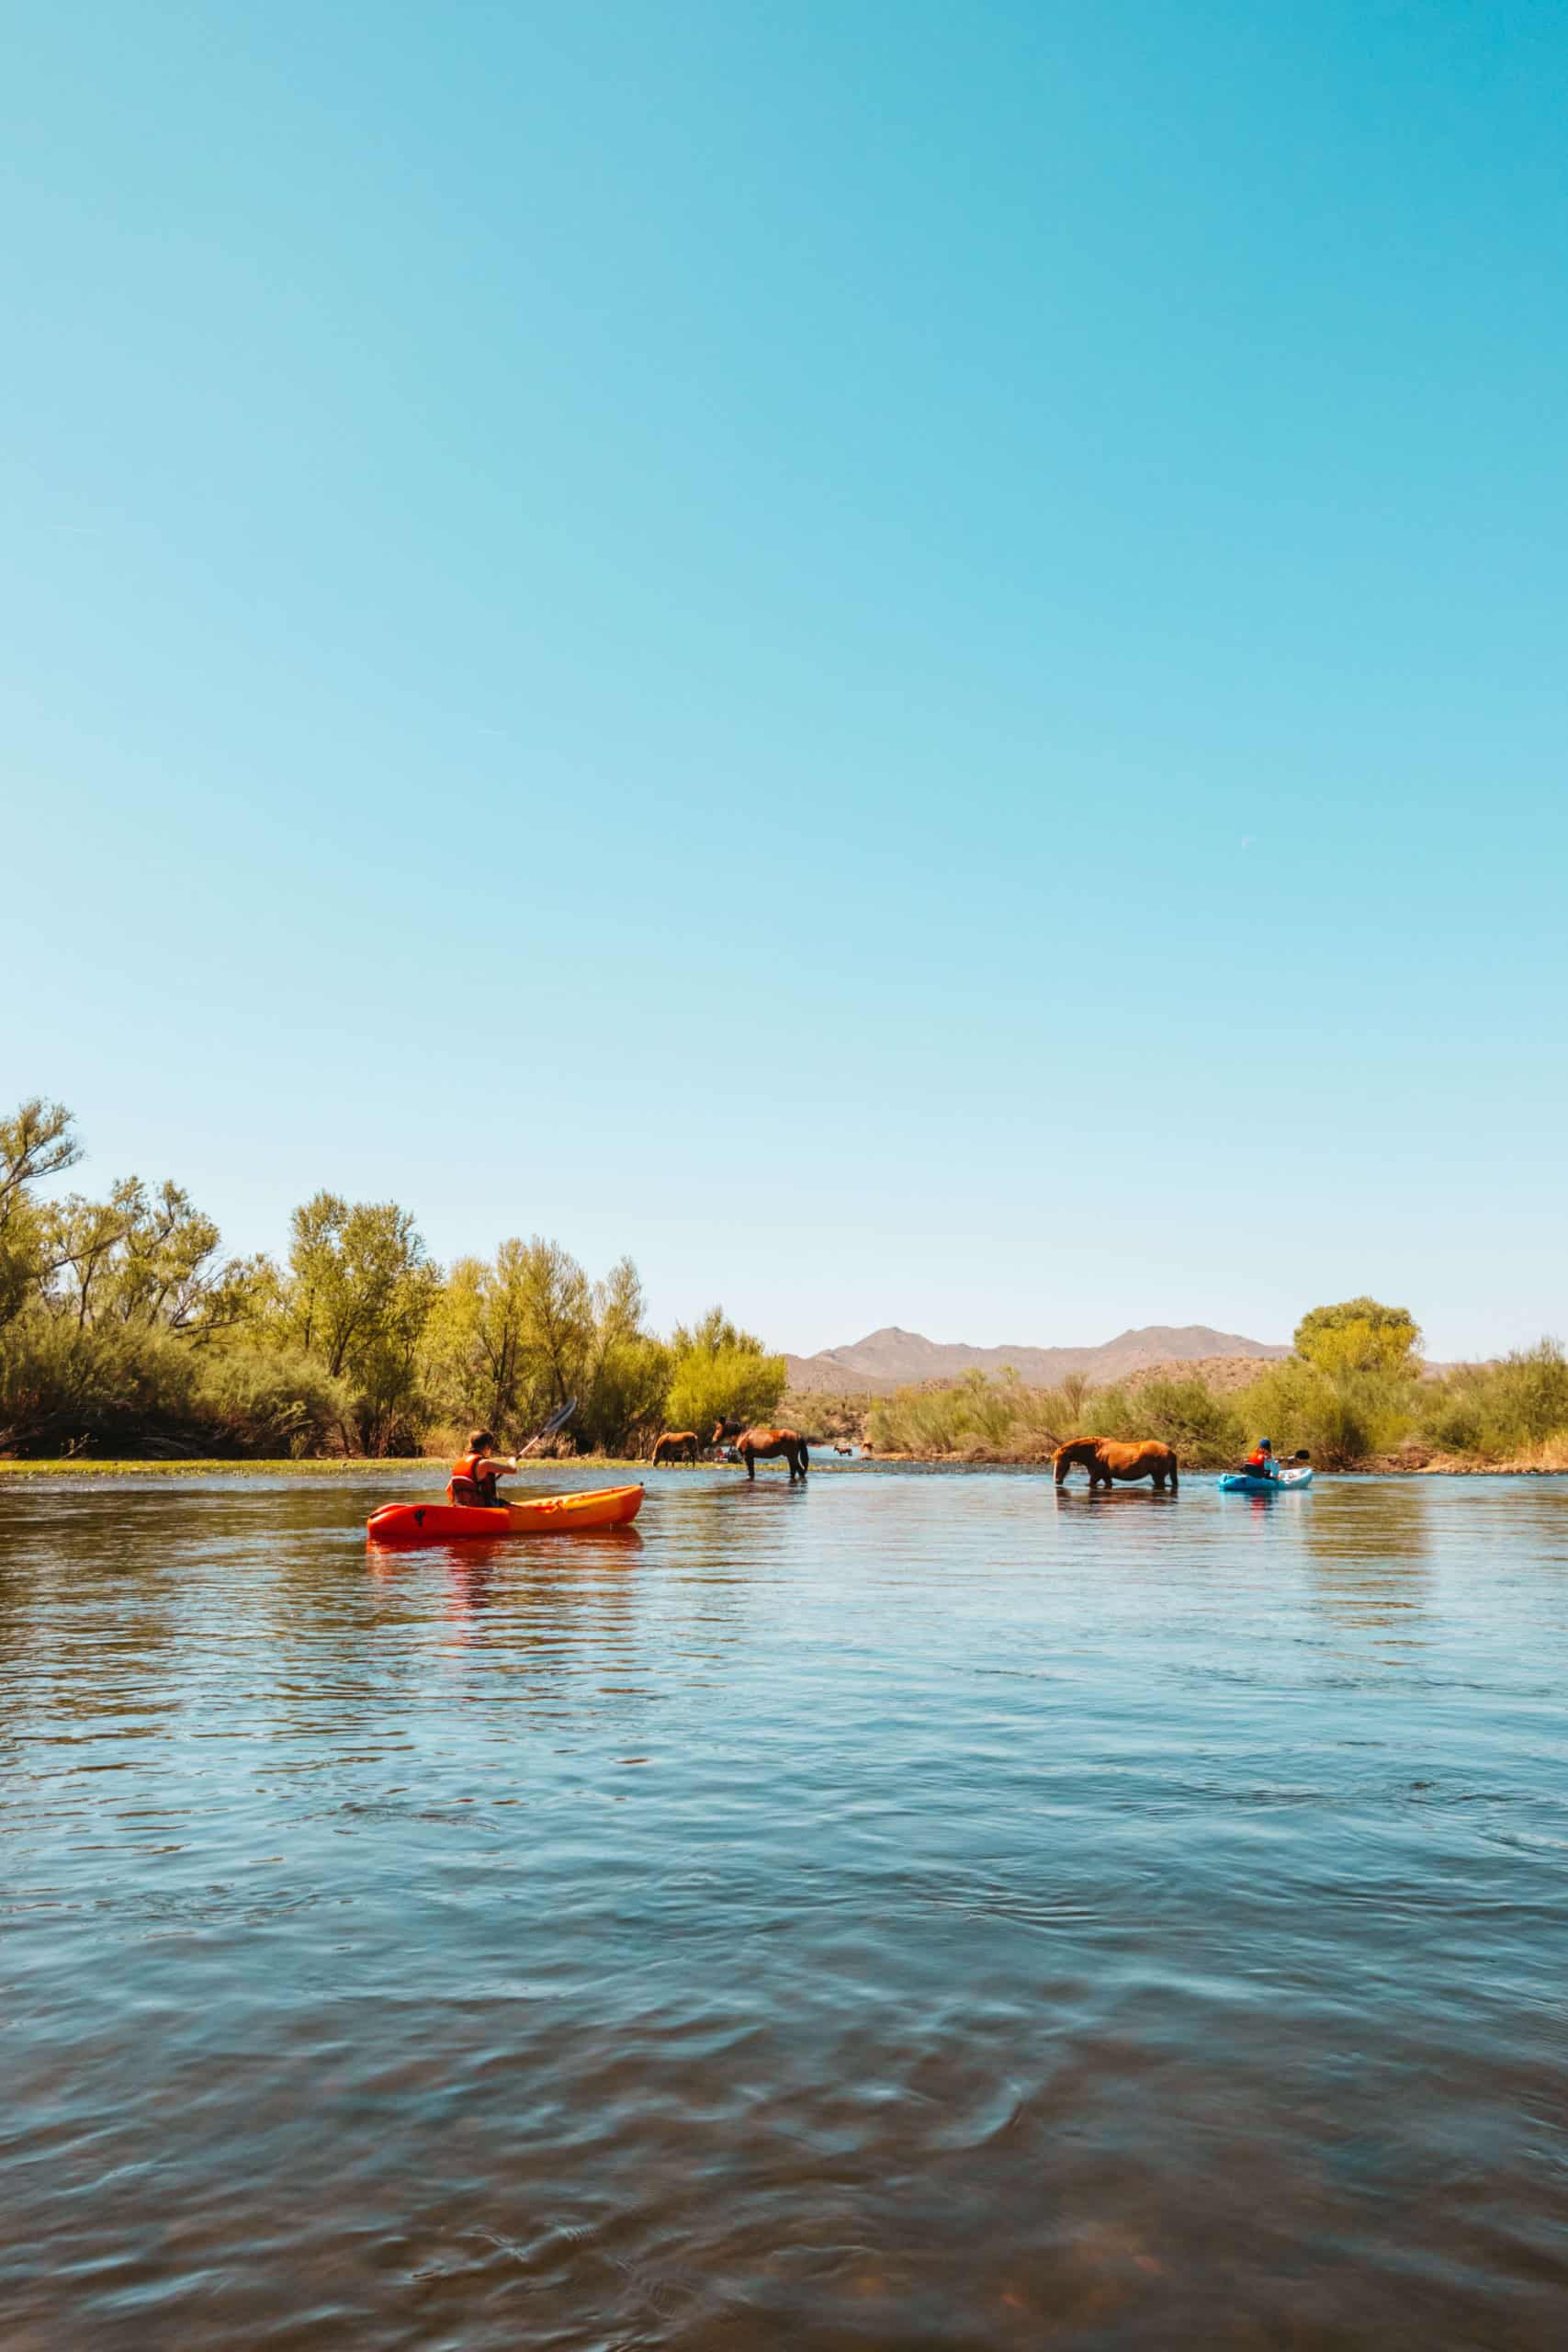 Kayakers and wild horses on the Salt River in Phoenix, Arizona